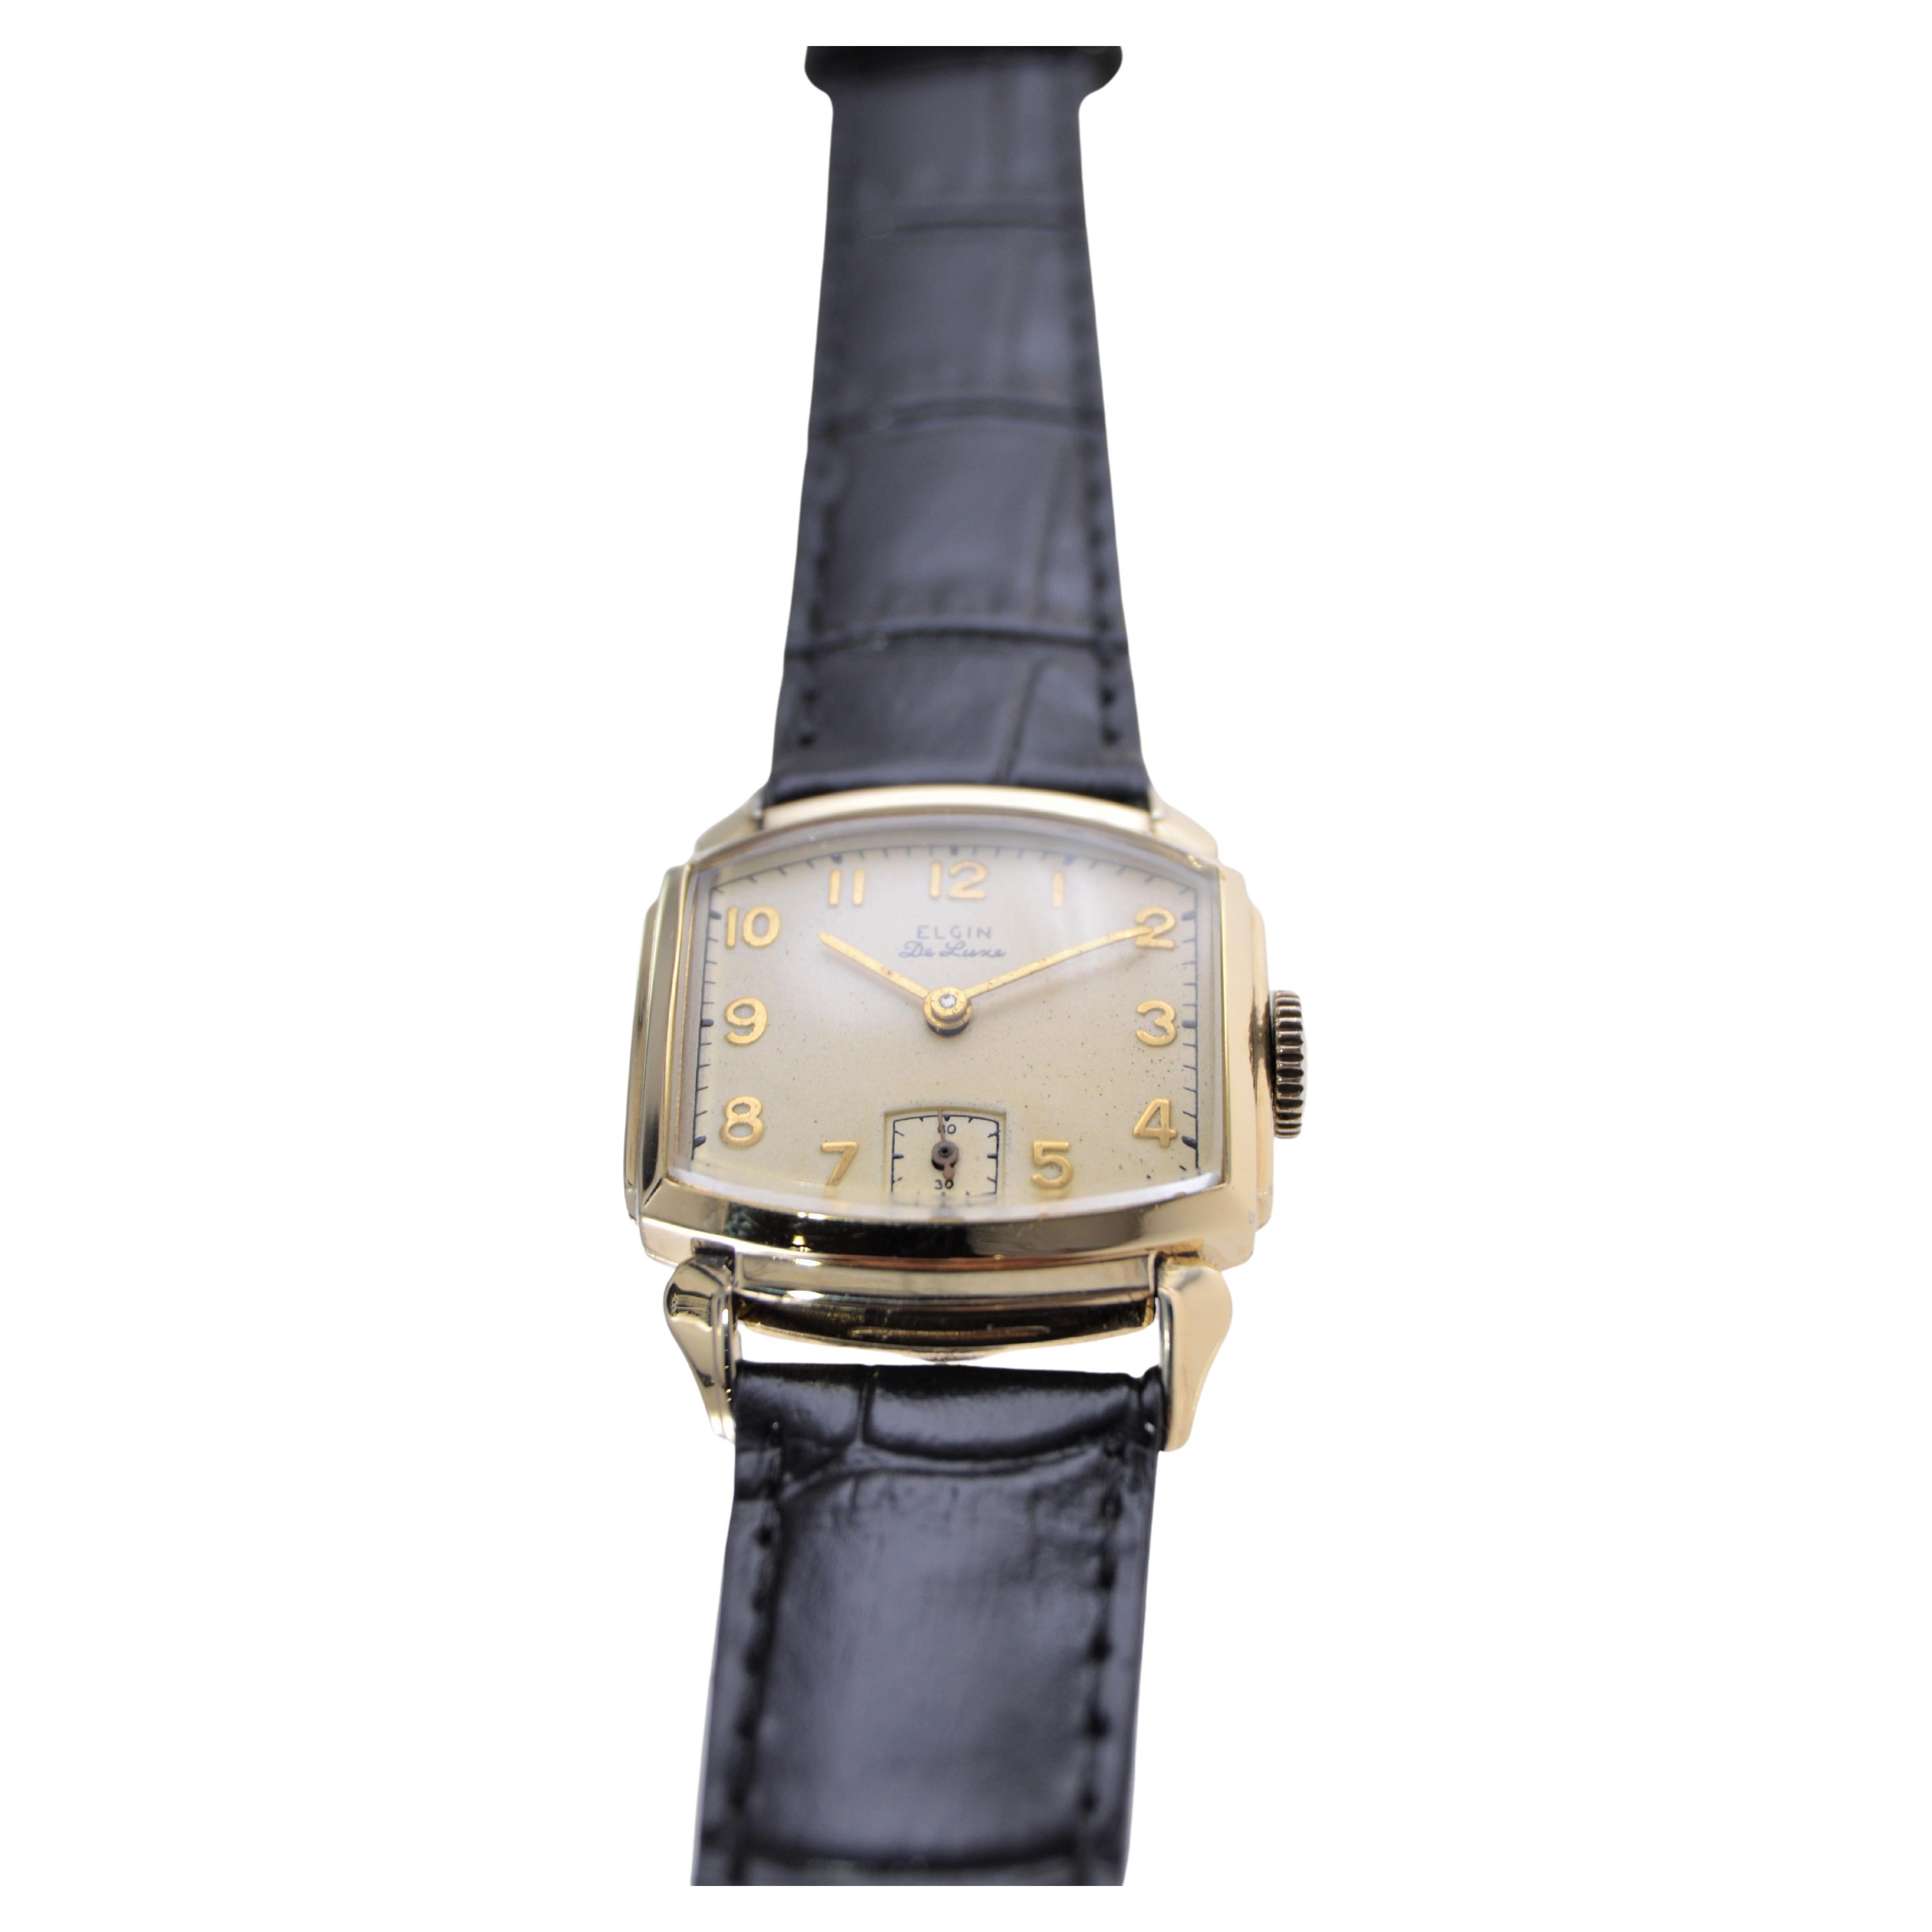 Elgin Gold Filled Art Deco Watch with Original Dial from 1940's For Sale 2